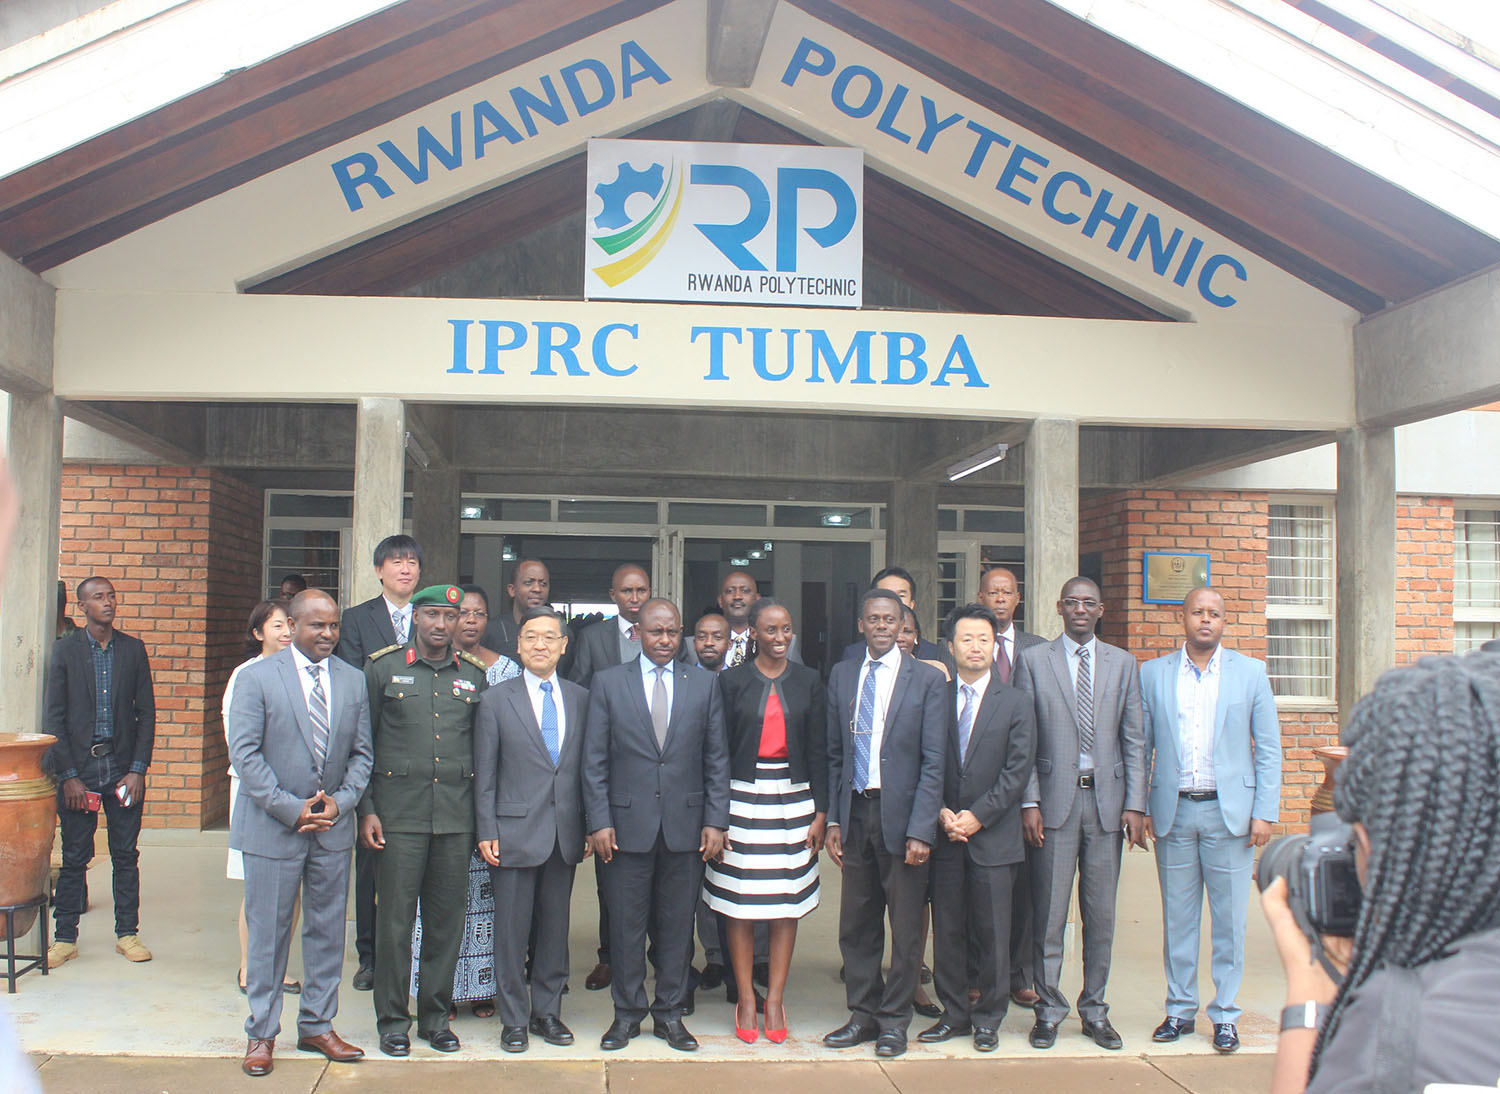 Officials pose for a group photo at IPRC Tumba premises as the school celebrates its 10th anniversary. All photos by Regis Umurengezi.